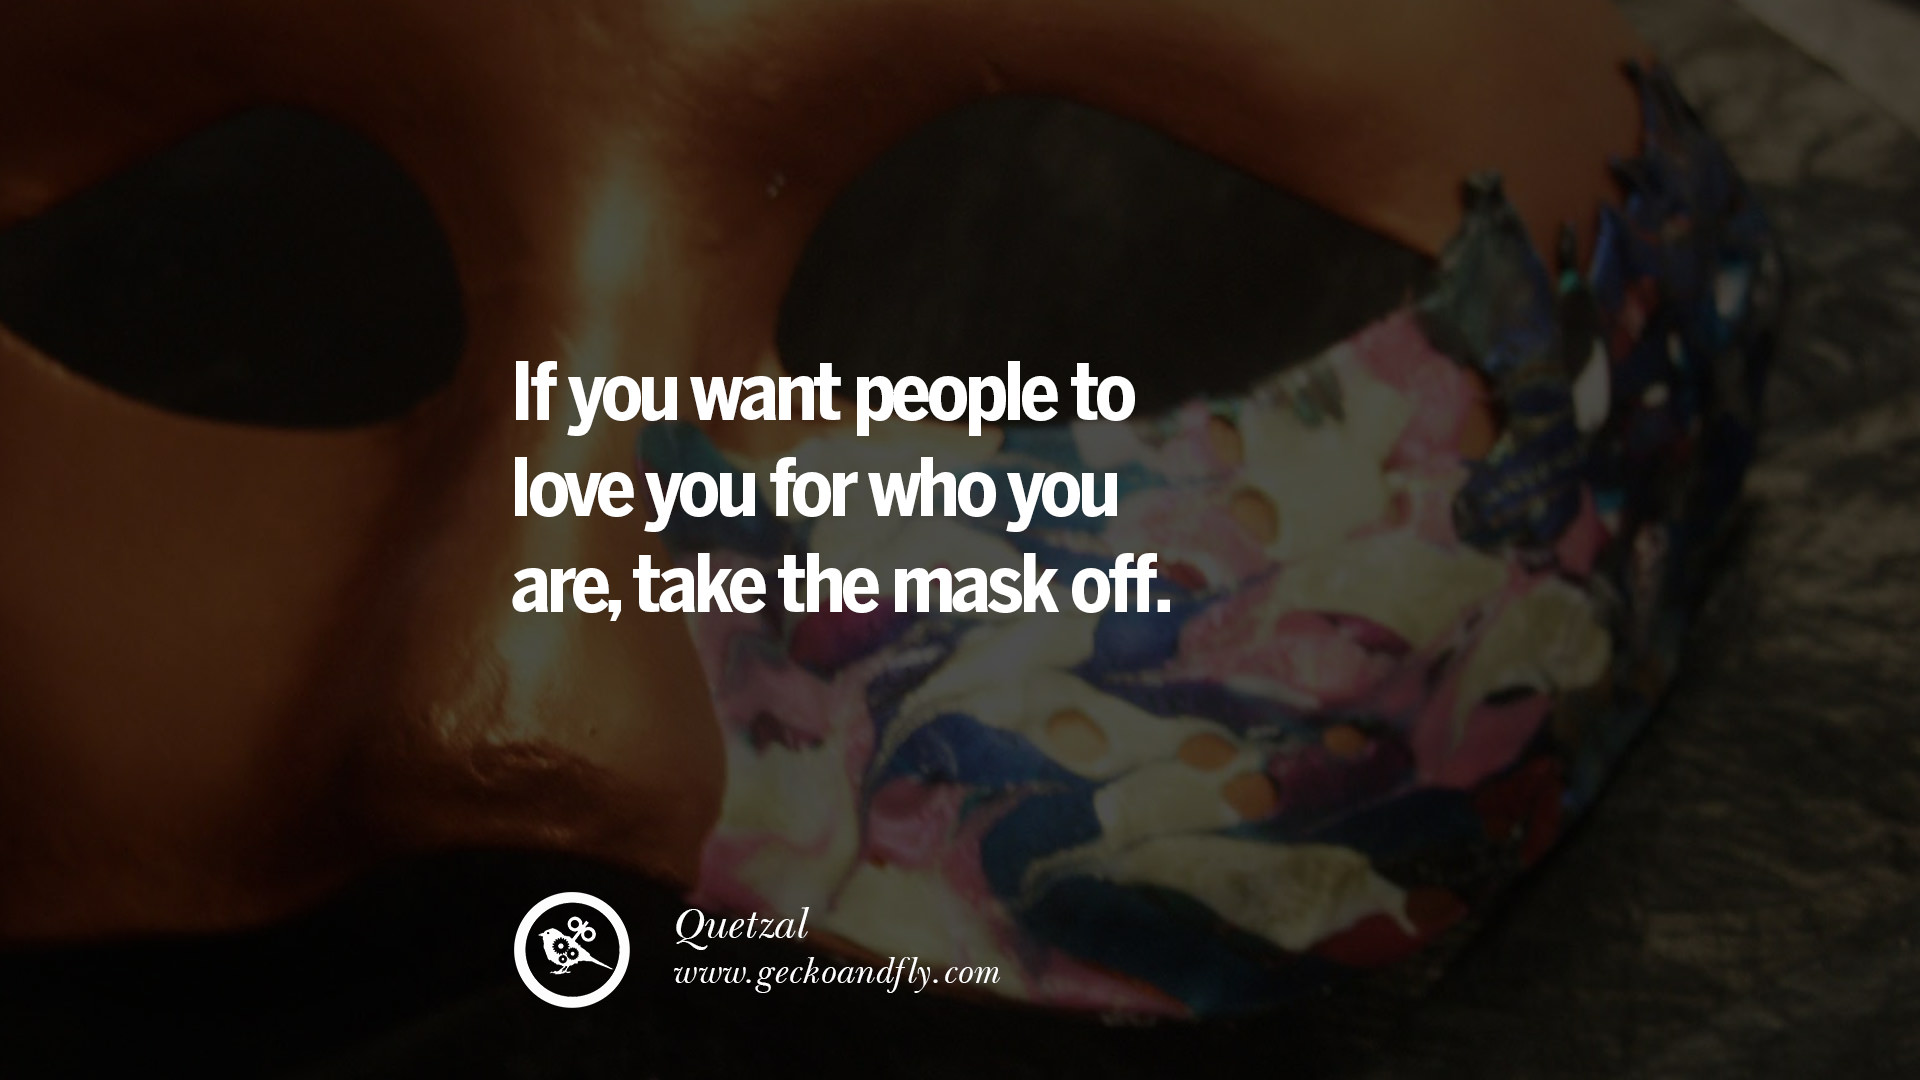 If you want people to love you for who you are take the mask off